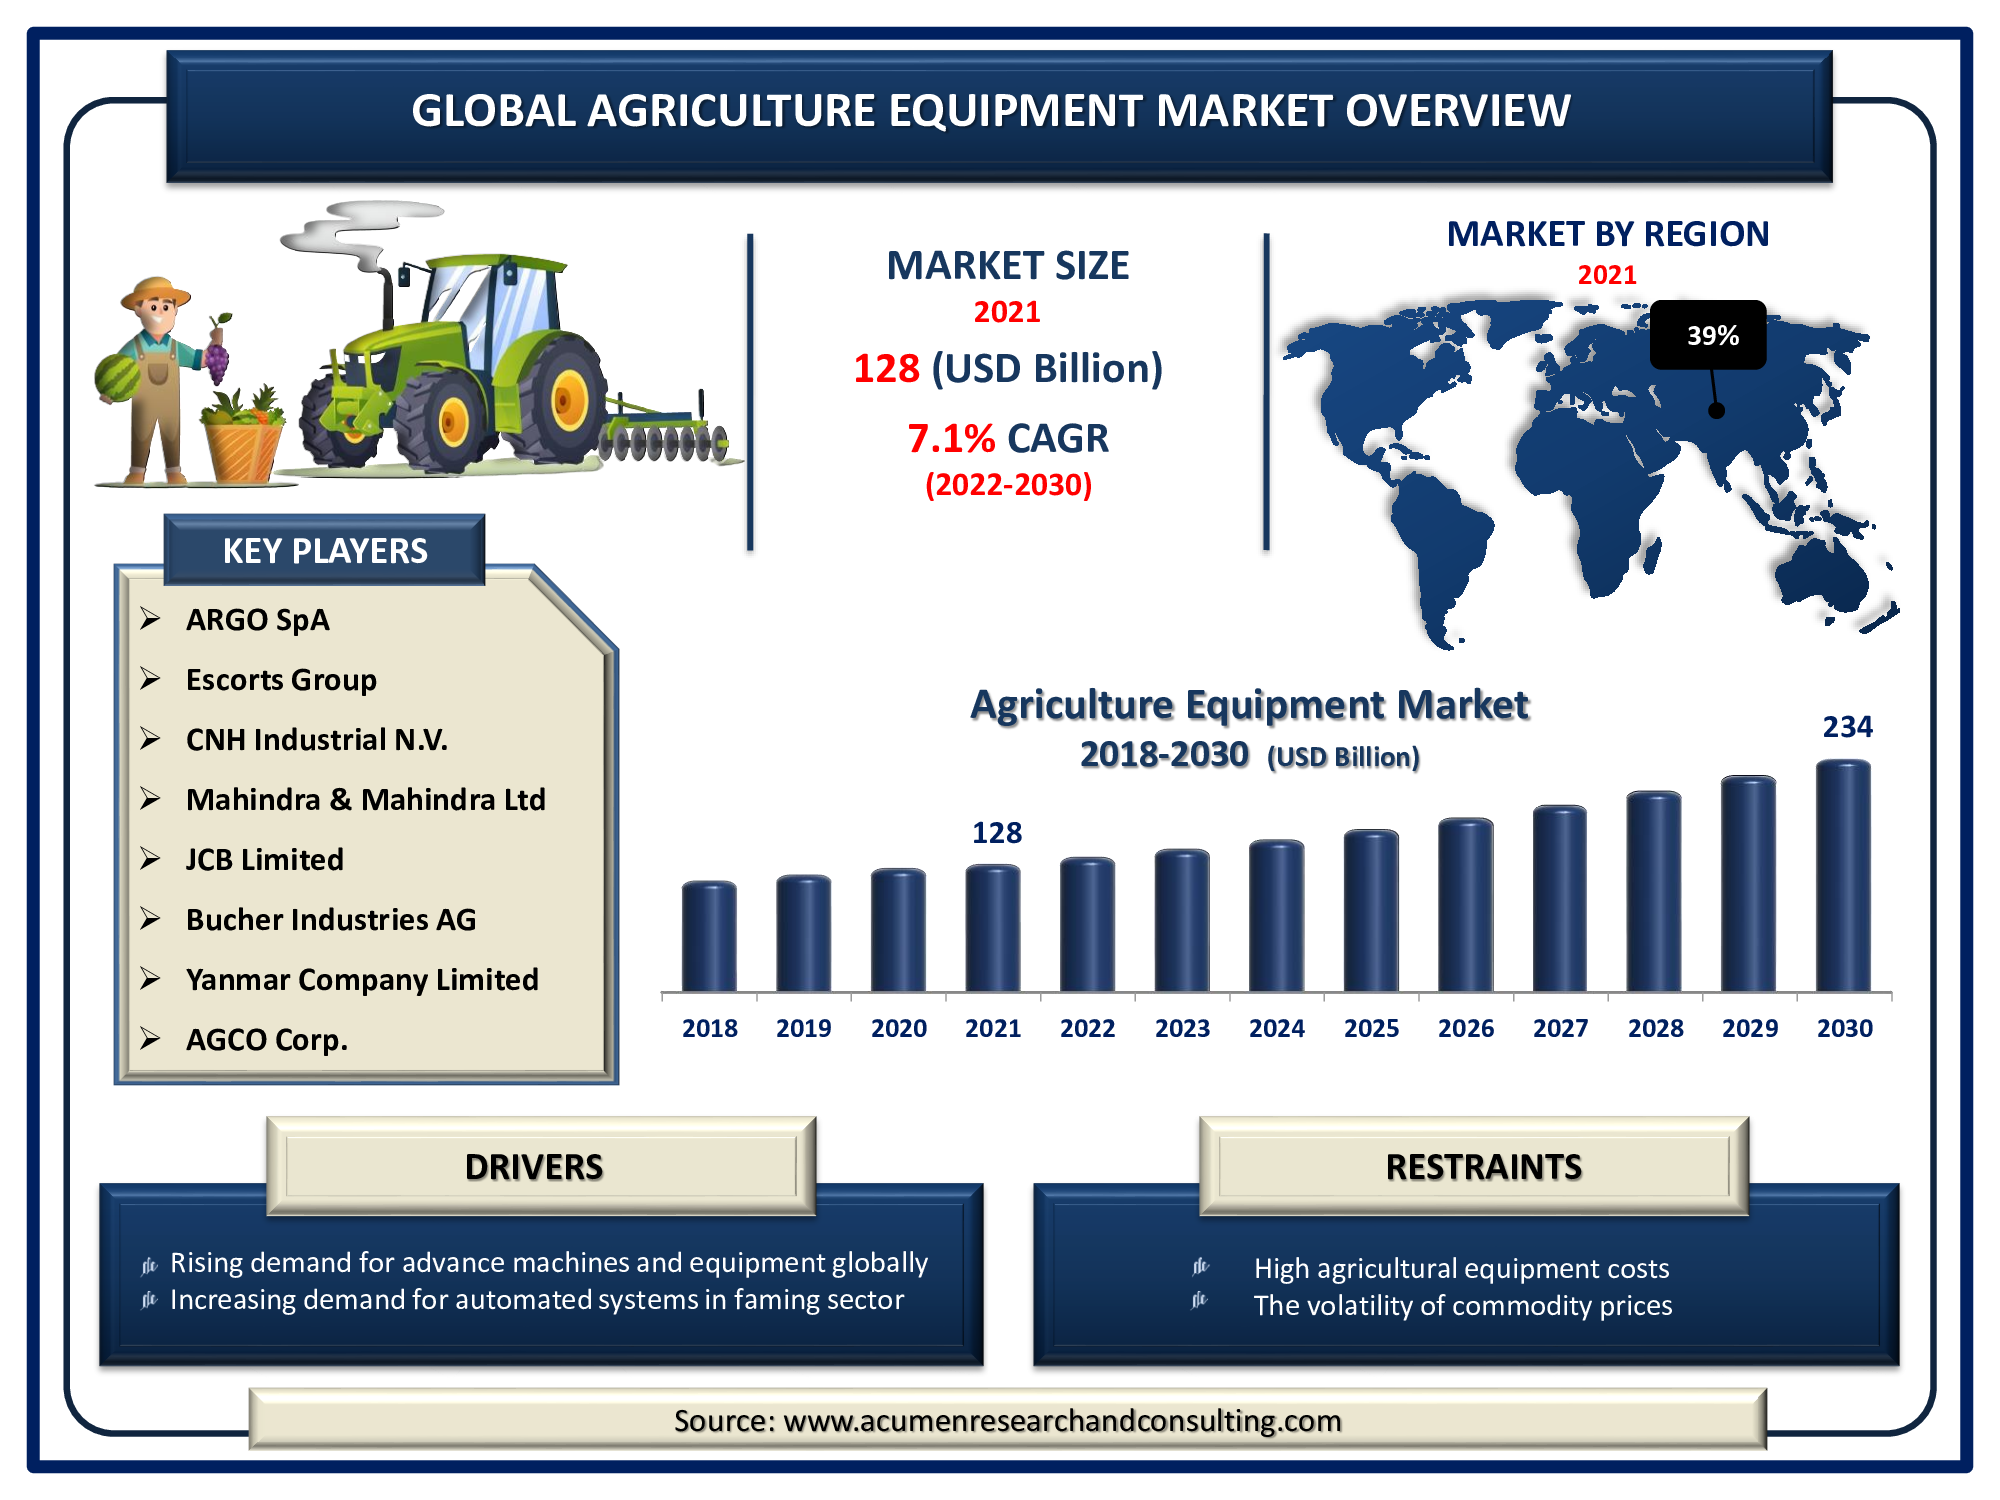 The Global Agriculture Equipment Market Size Accounted for USD 128 Billion in 2021 and is predicted to be worth USD 234 Billion by 2030, with a CAGR of 7.1% during the forthcoming period from 2022 to 2030.